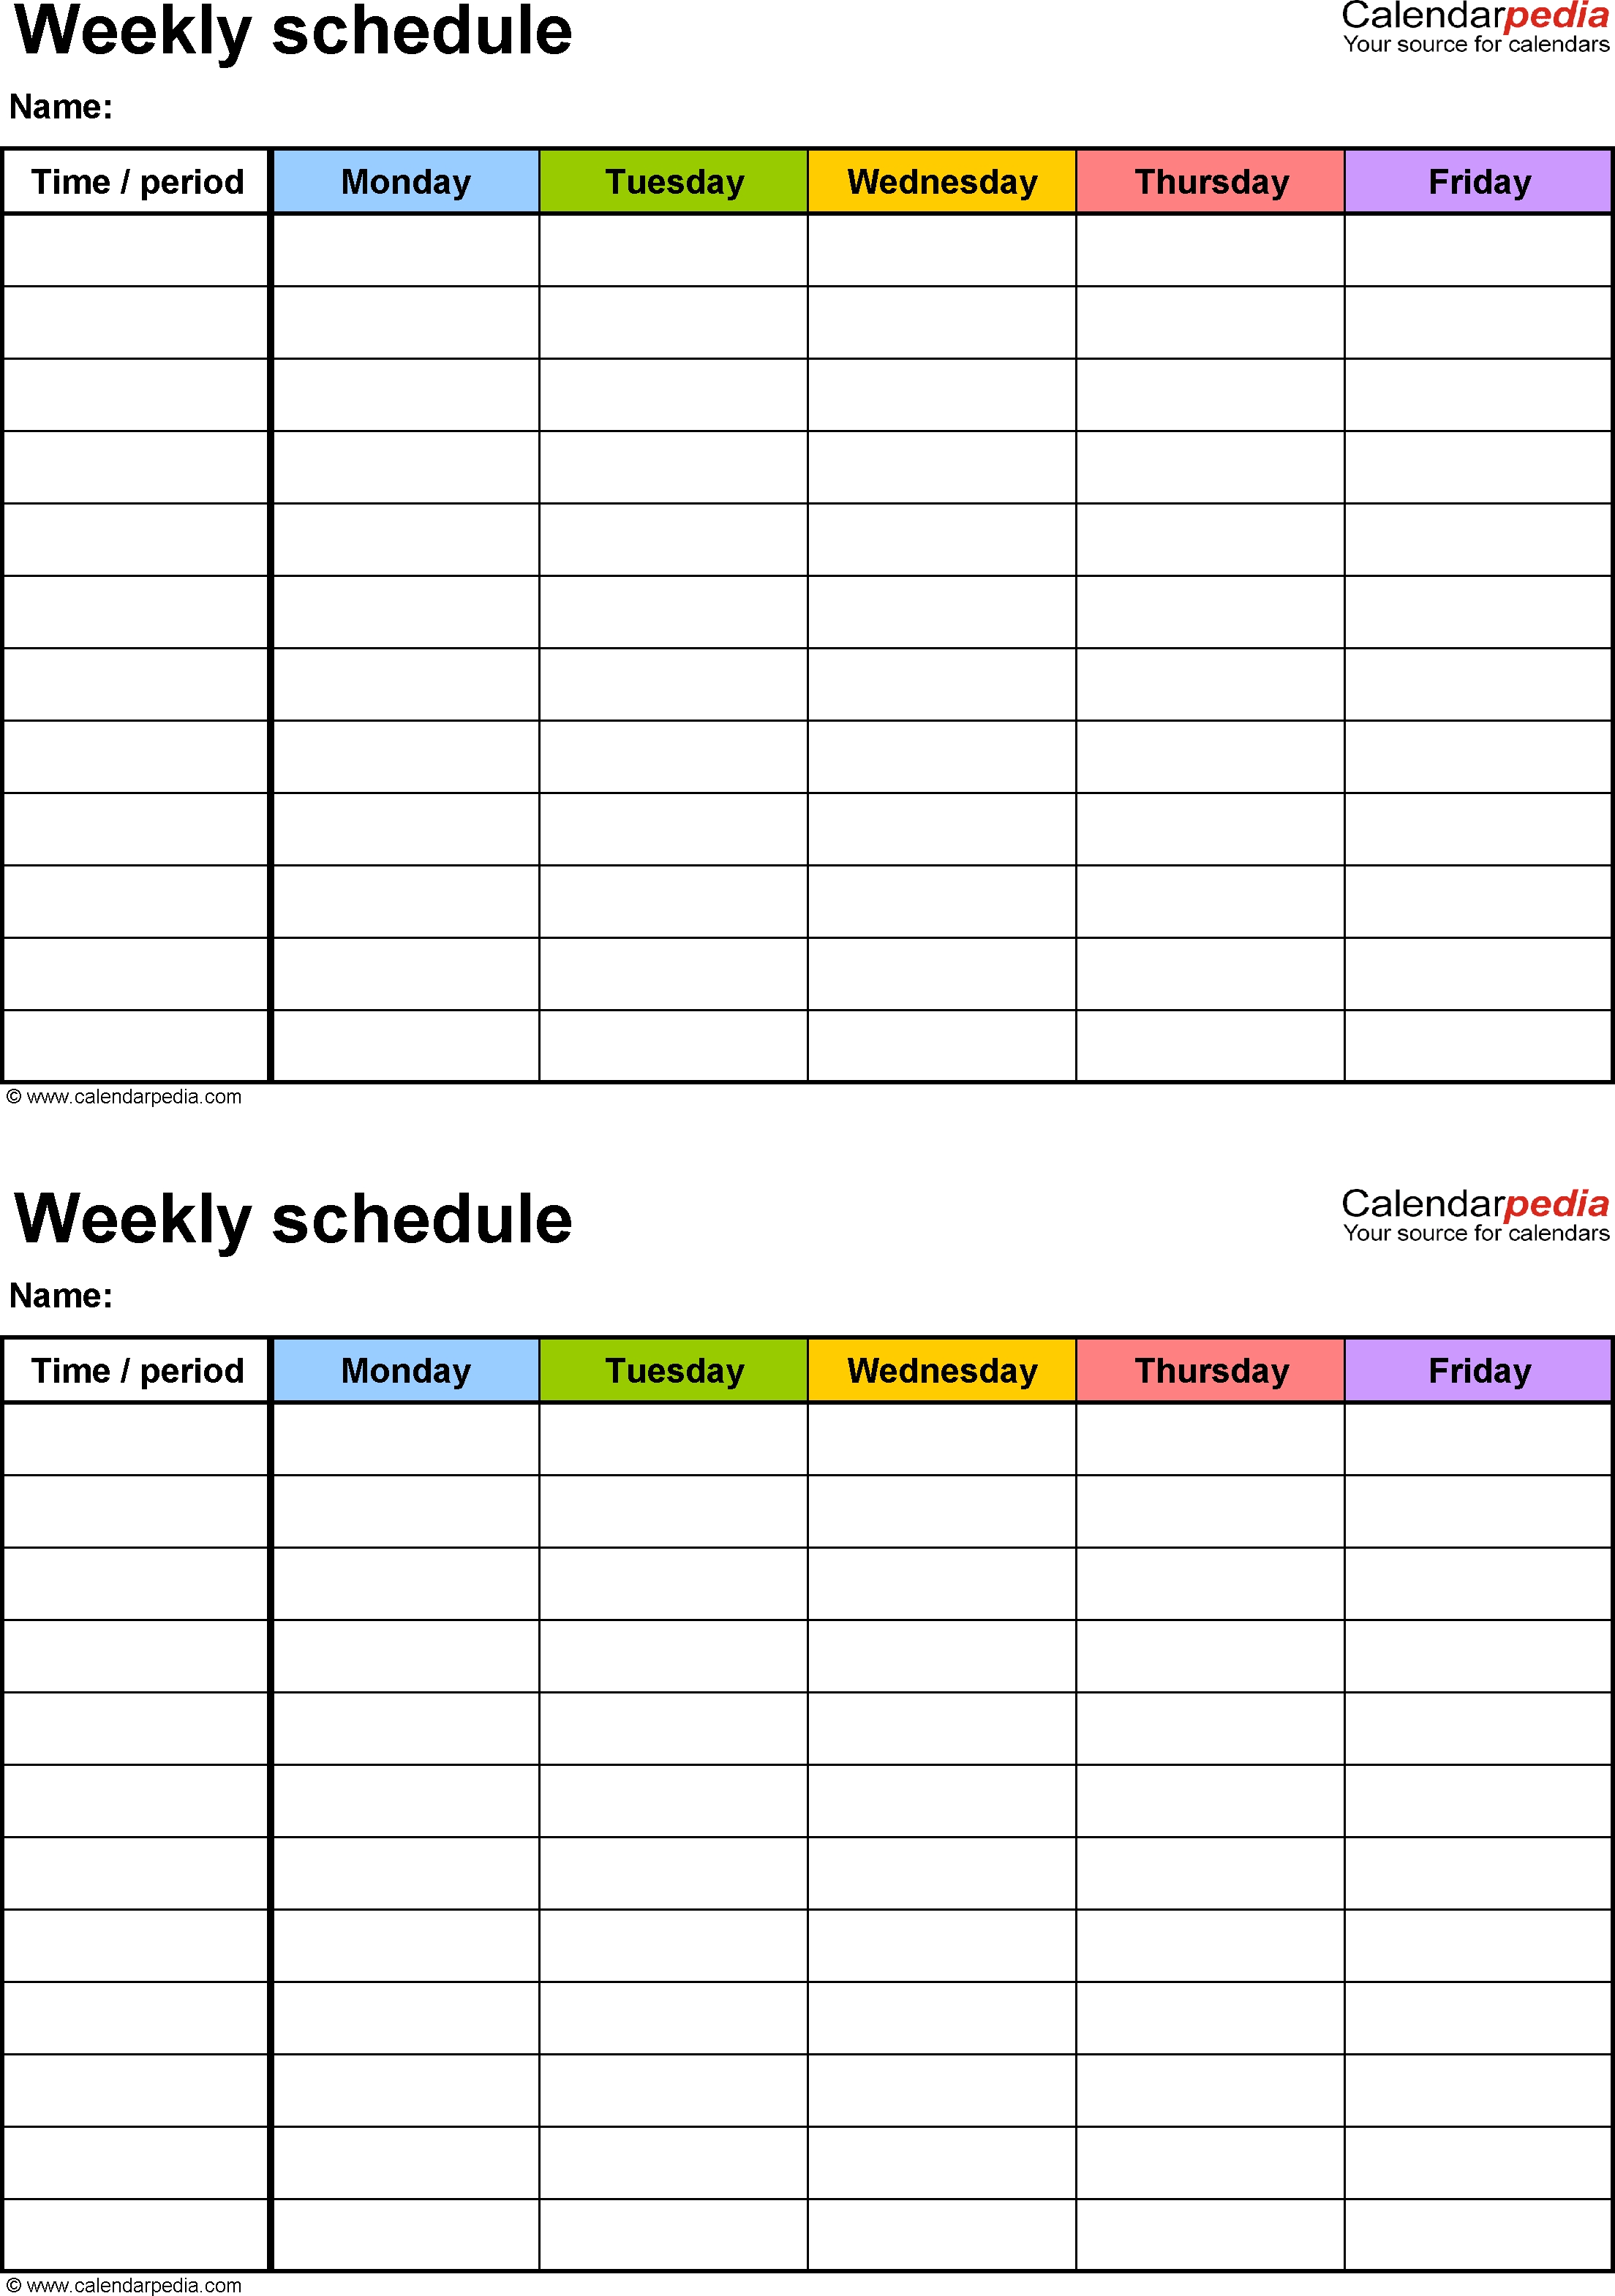 Free Weekly Schedule Templates For Word - 18 Templates  5 Day Week Calendar Template